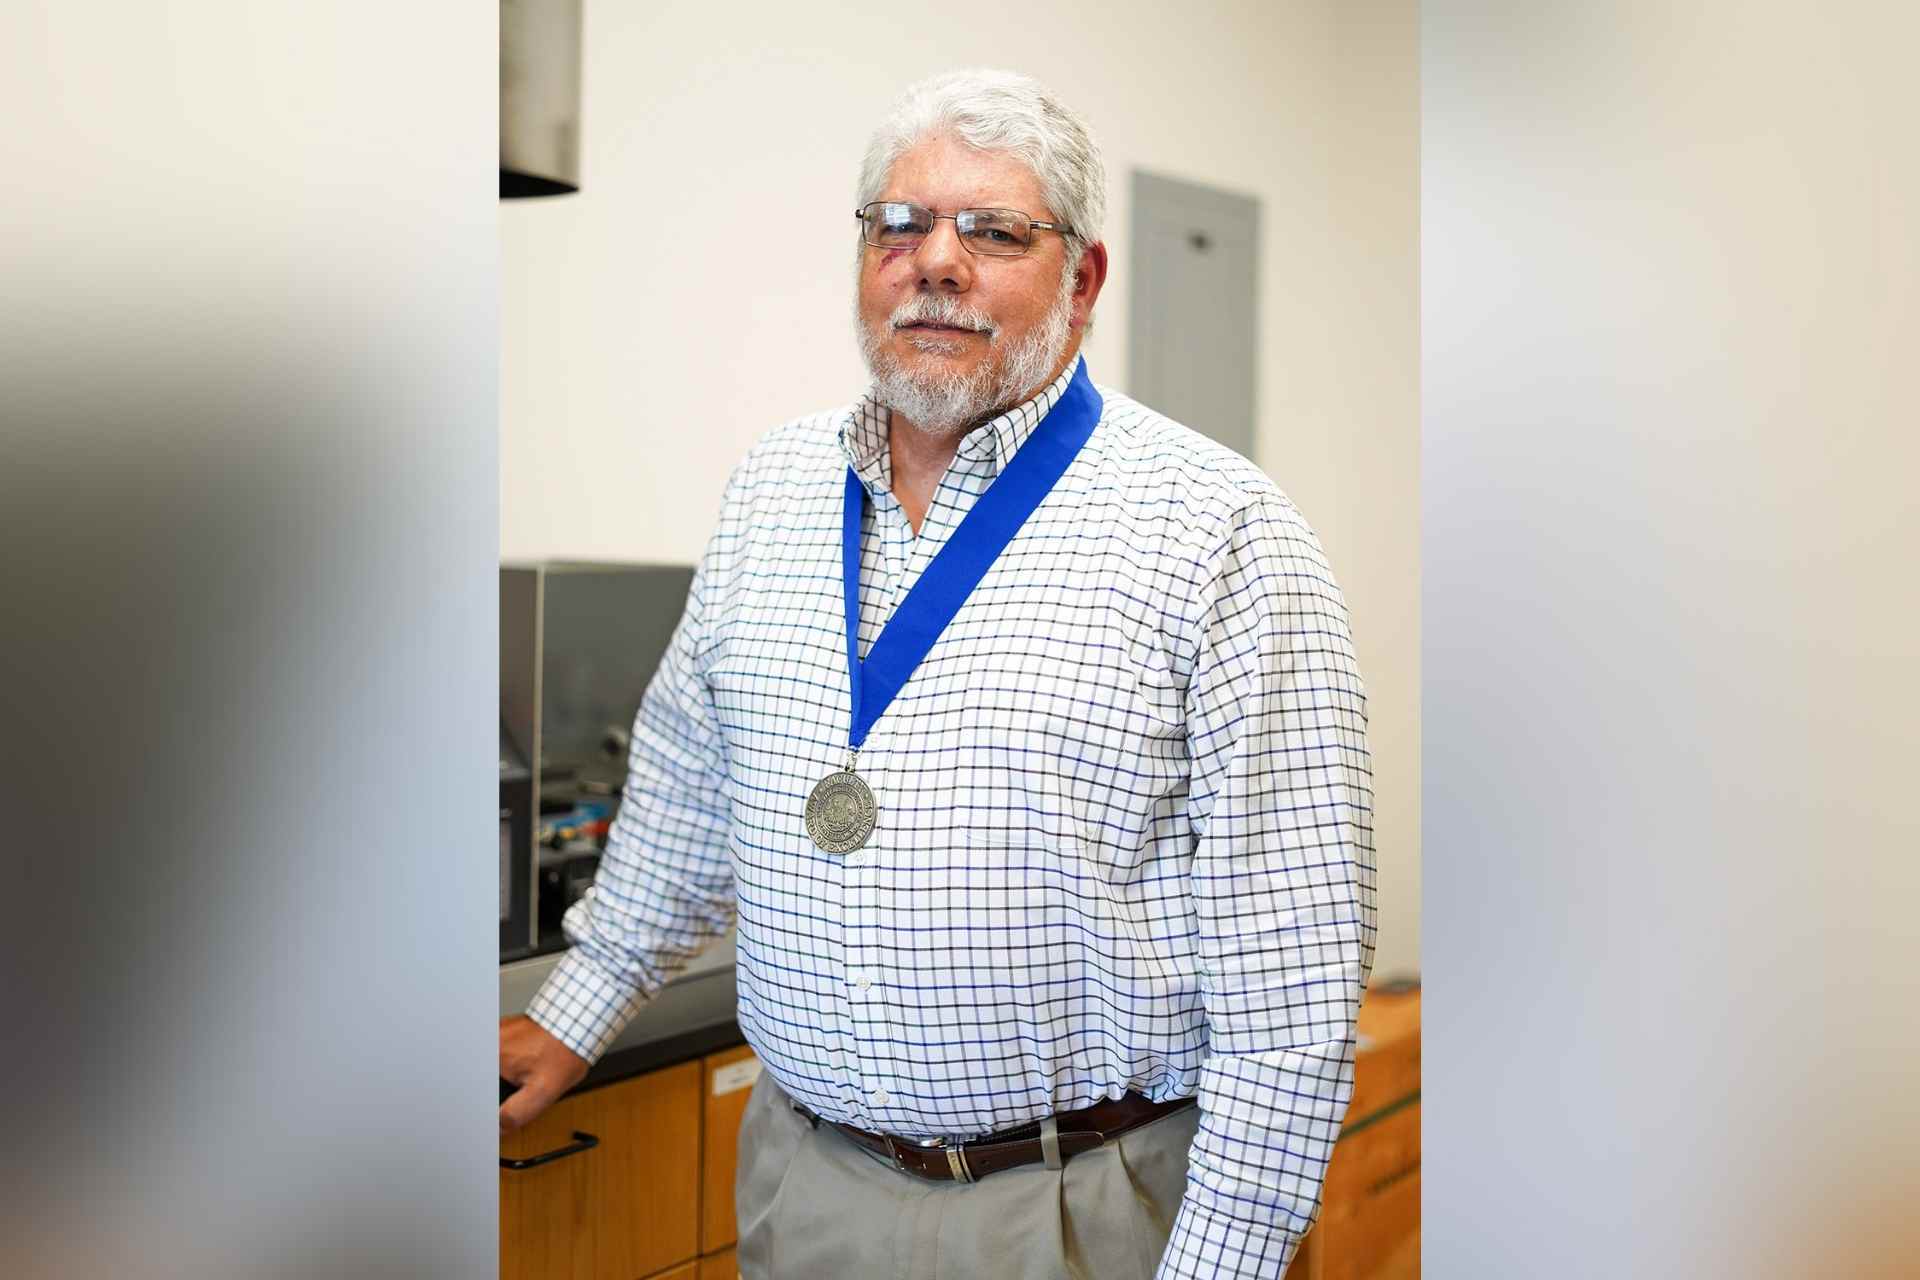 Glenville State College Professor of Chemistry Dr. David O’Dell, pictured wearing his 2021 Faculty Award of Excellence medallion.